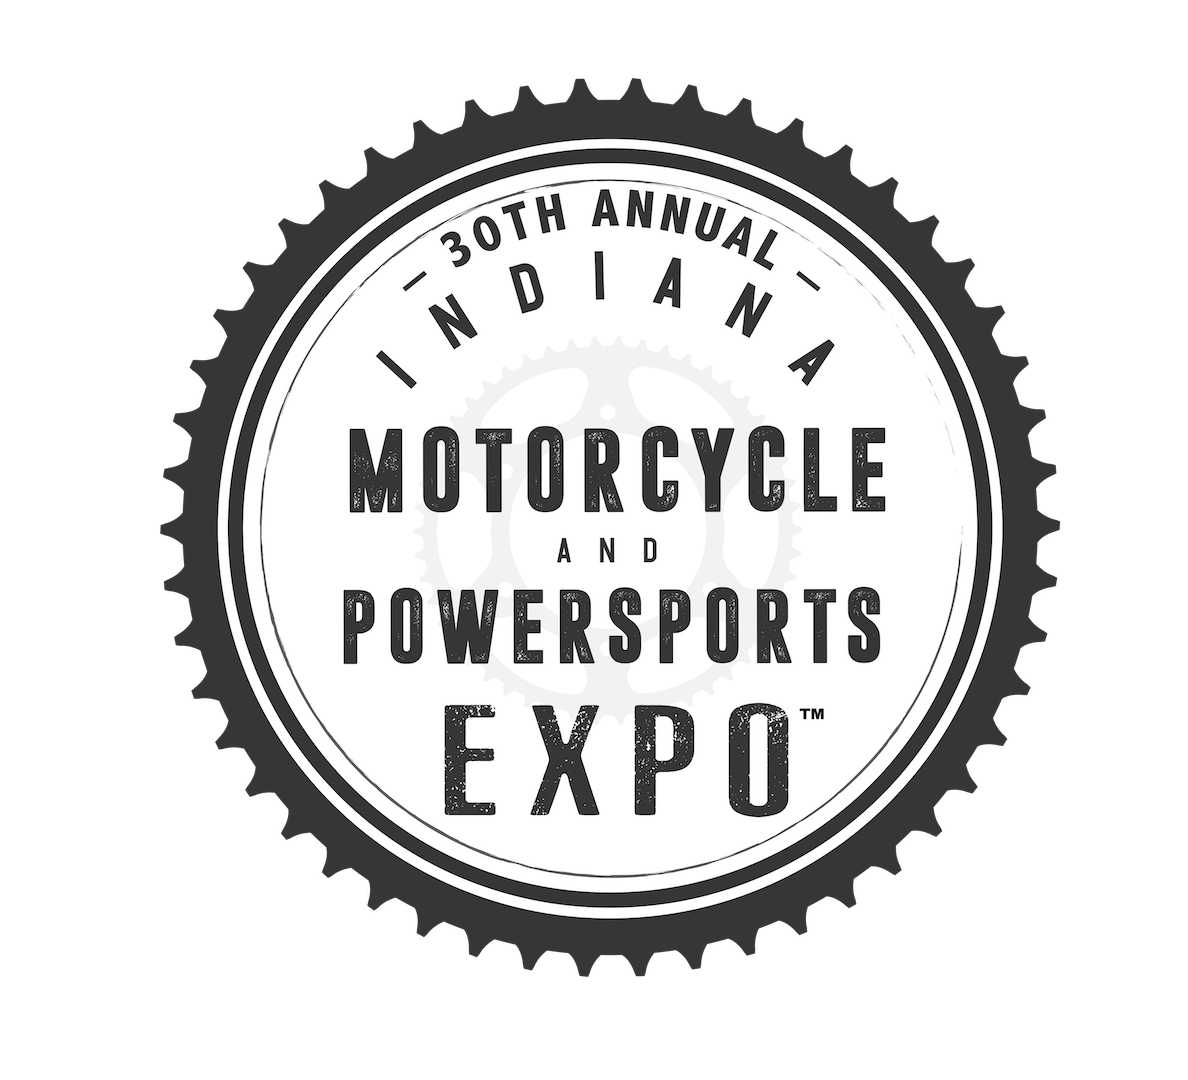 The Indiana Motorcycle & Powersports Expo